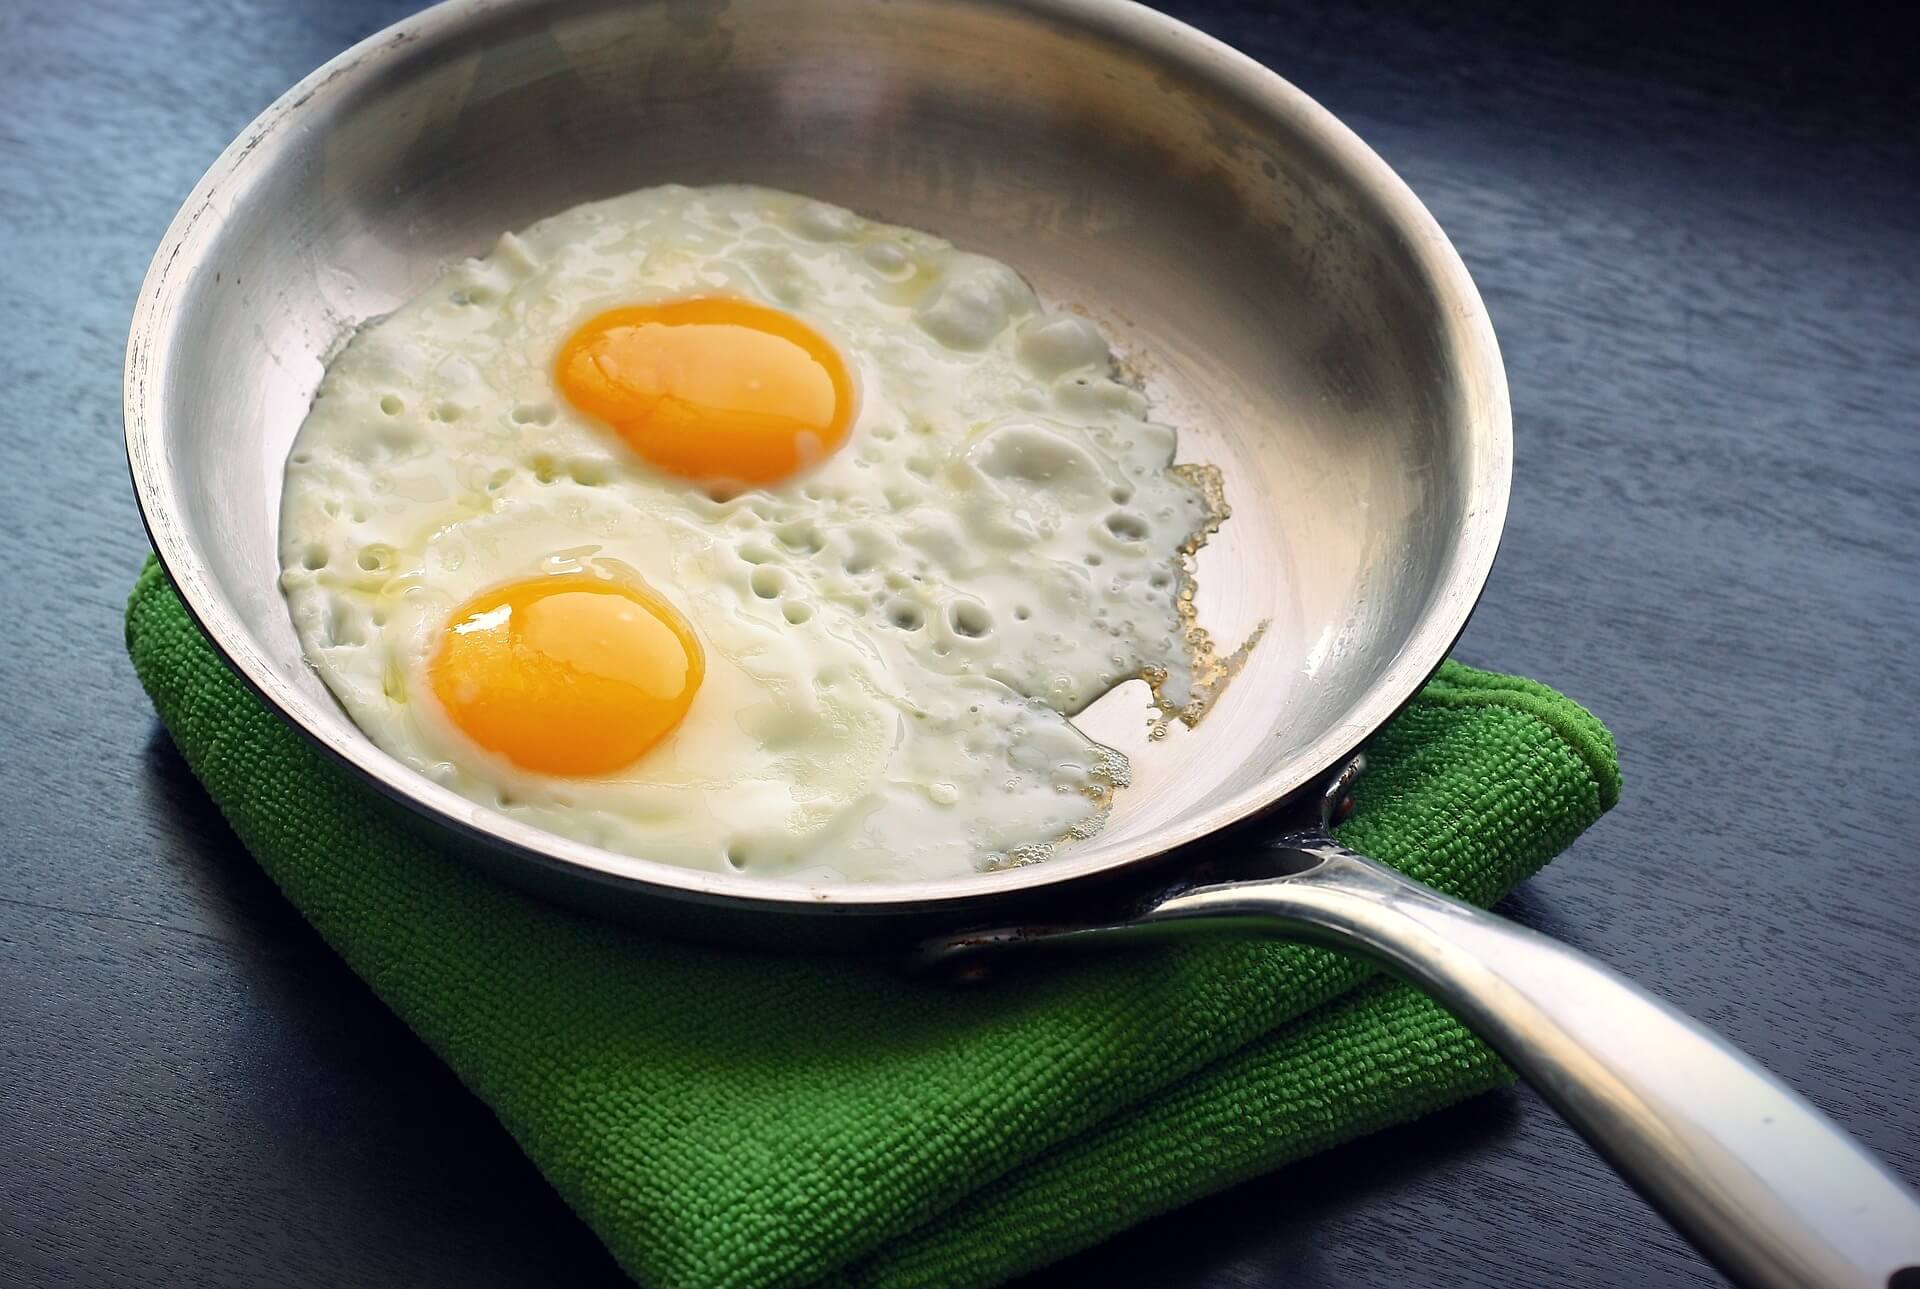 https://www.foodabovegold.com/wp-content/uploads/2016/08/How-To-Cook-Eggs-In-Stainless-Steel.jpg